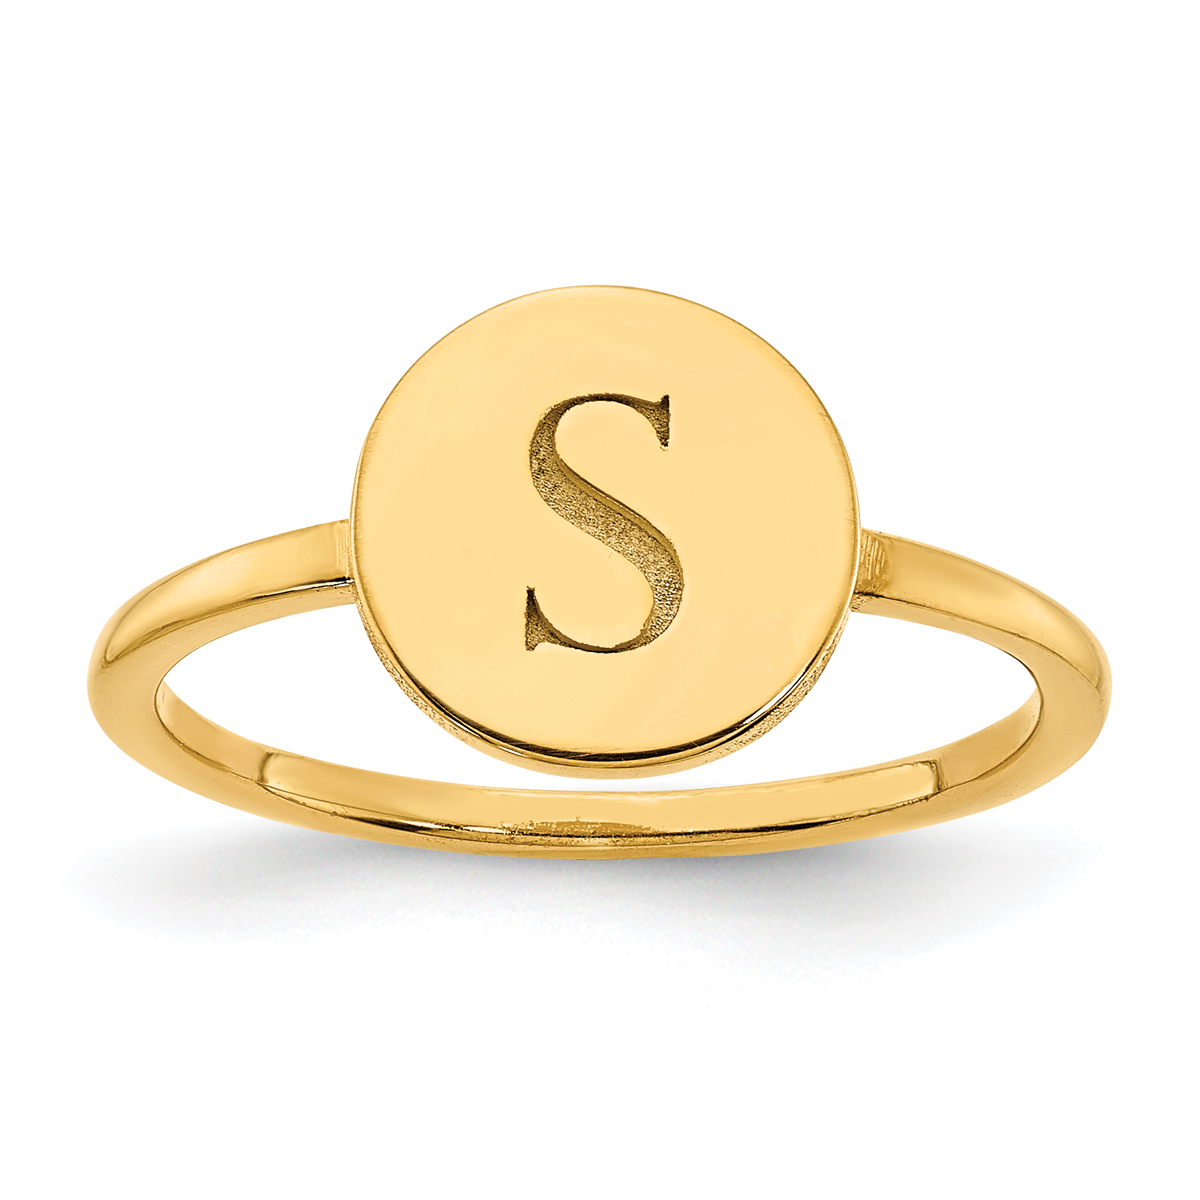 Initial S Letter Signet Ring With Diamond in 14K Solid Yellow Gold Sz 4.25  | eBay